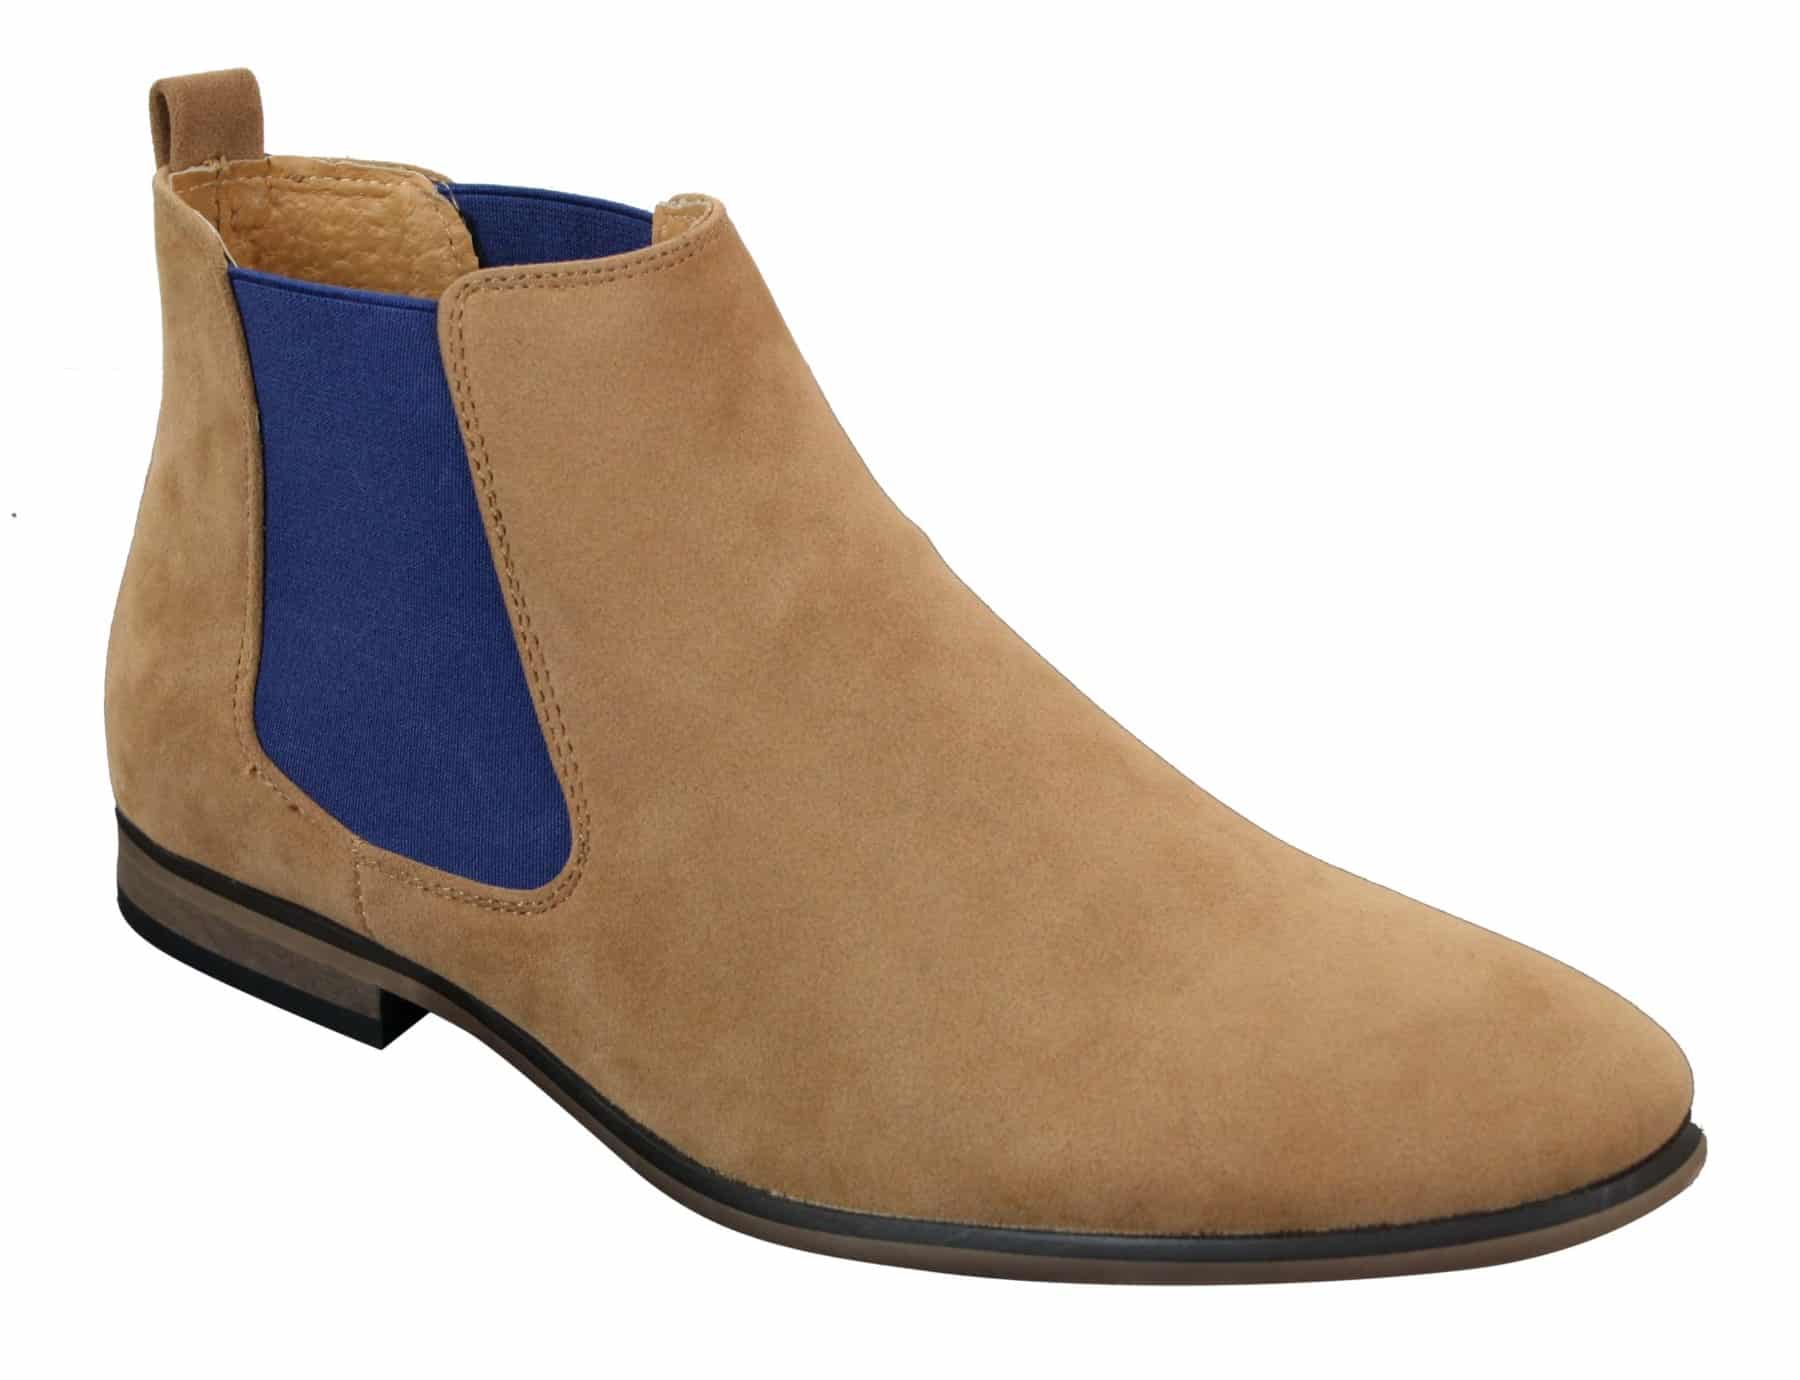 Mens Leather Chelsea Boots New Ankle Biker Smart Formal Desert Boots Shoes Size 